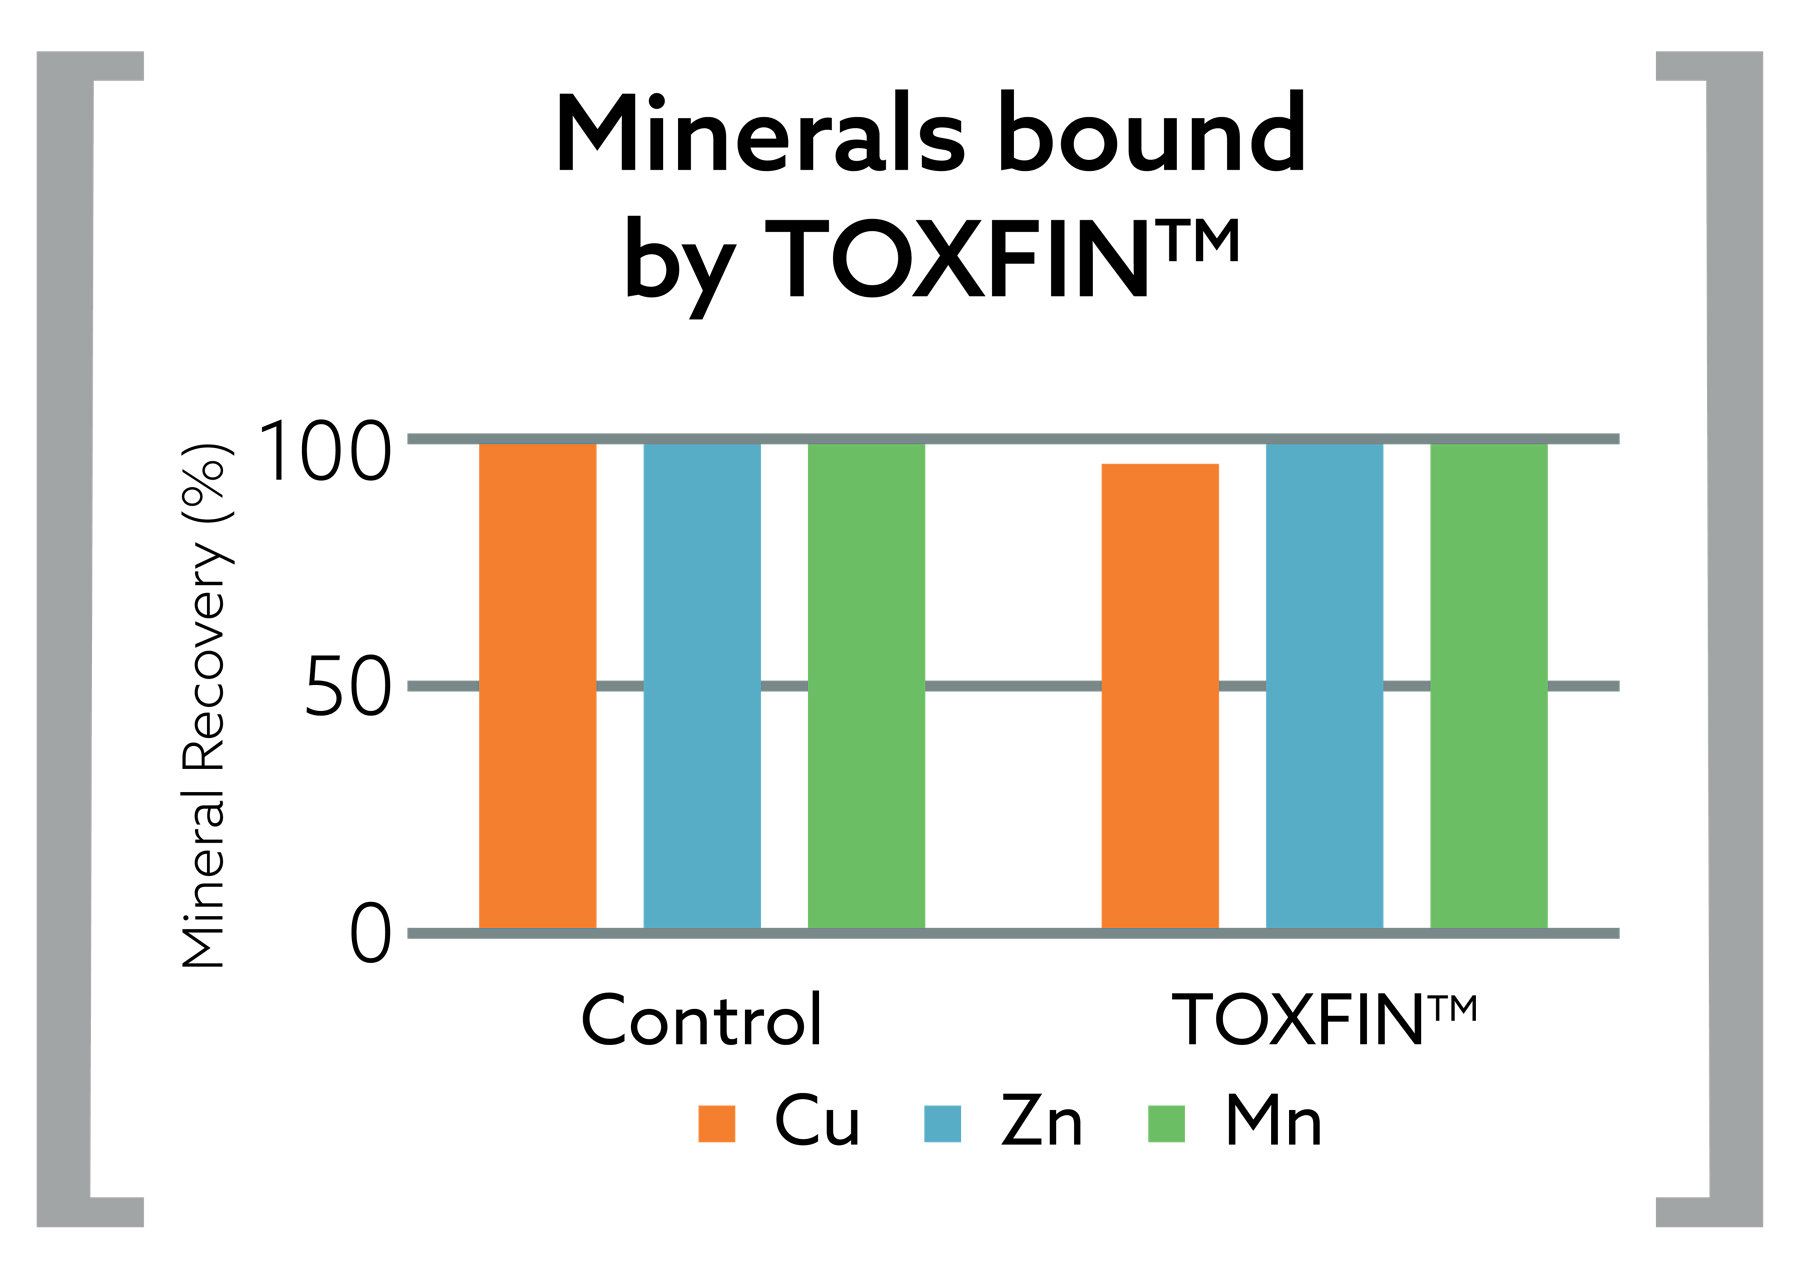 kaa Toxfin minerals bounded graph